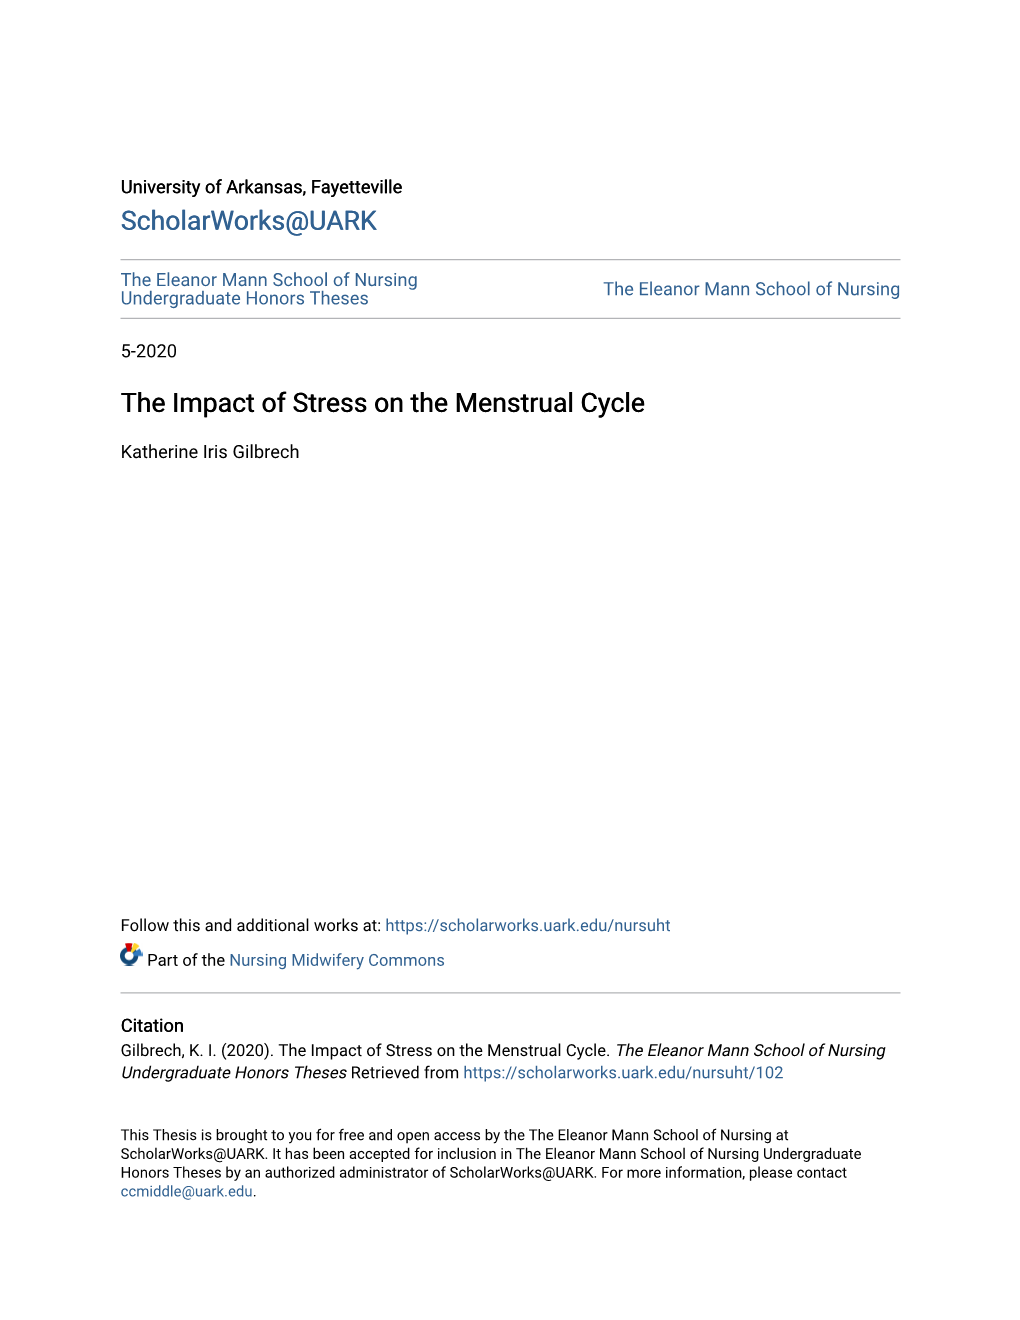 The Impact of Stress on the Menstrual Cycle